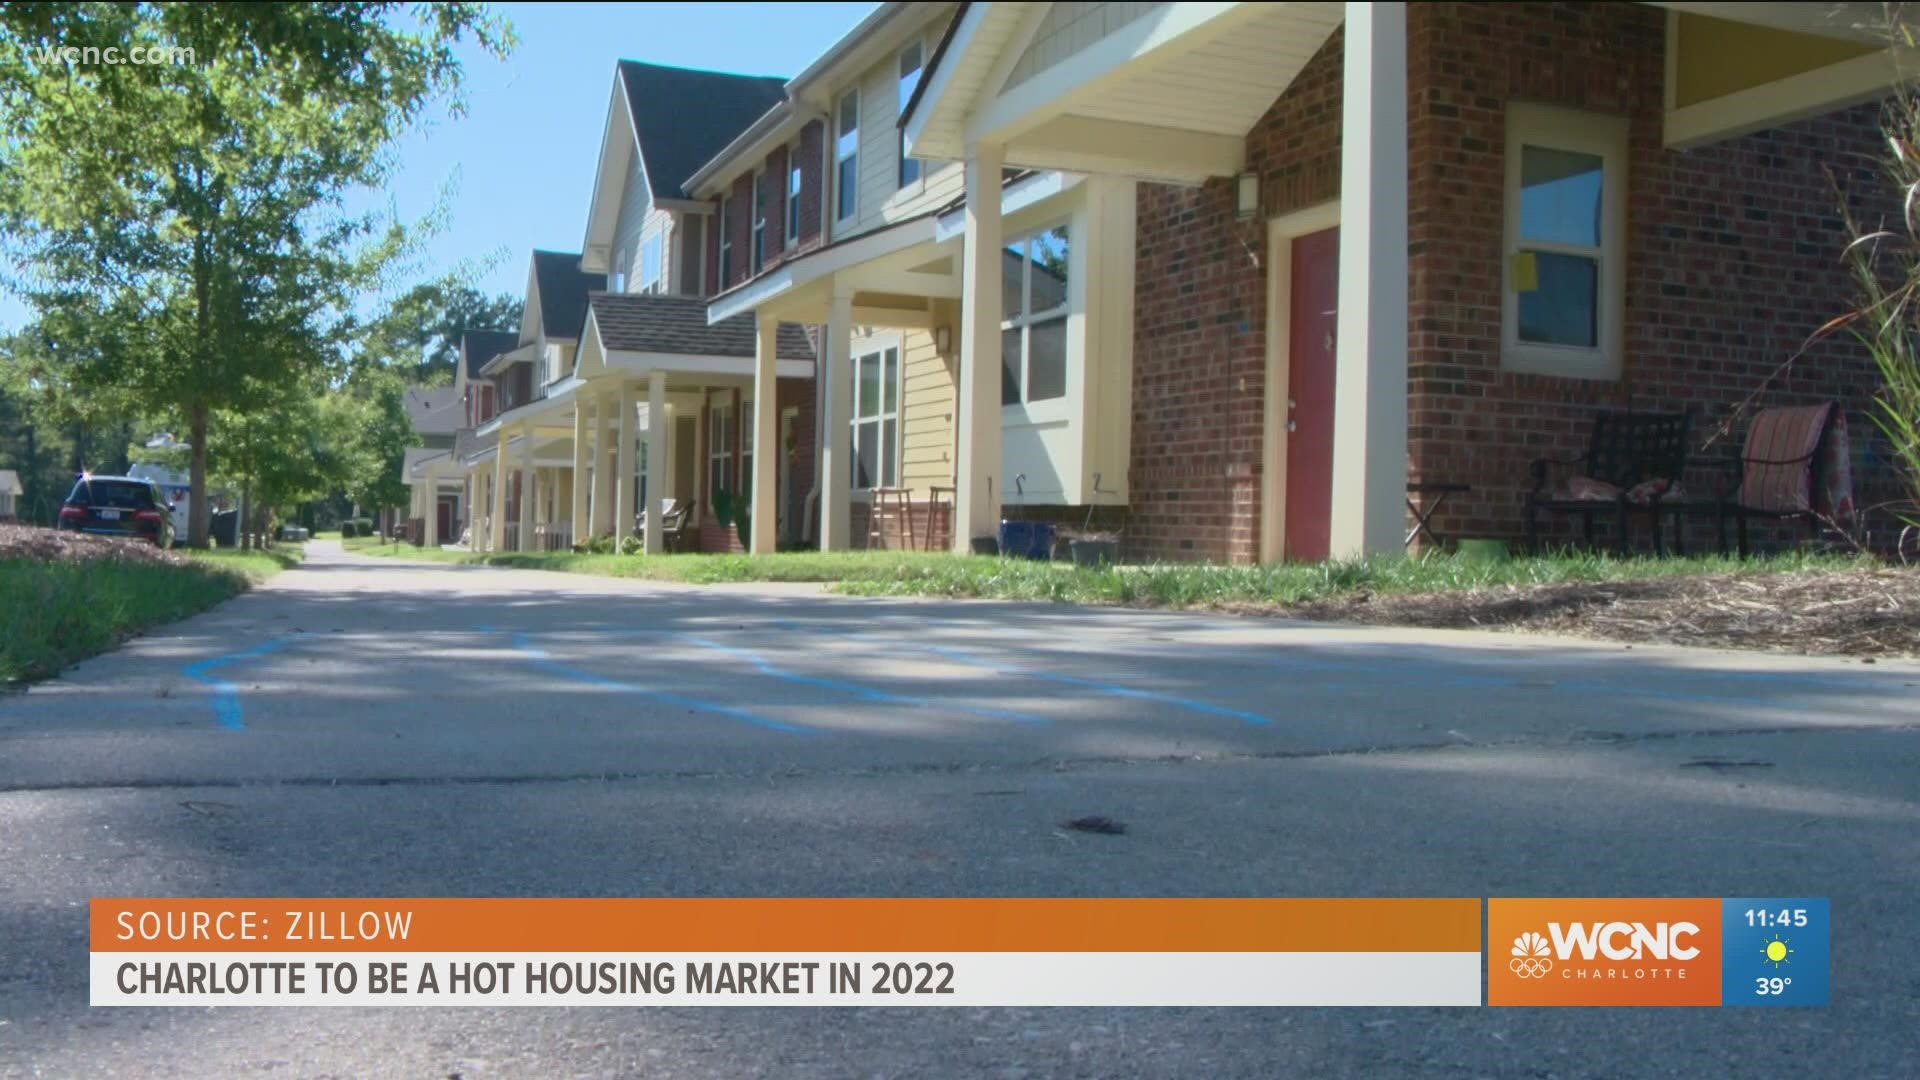 Zillow says it expects Charlotte to be one of the hottest housing markets this year.